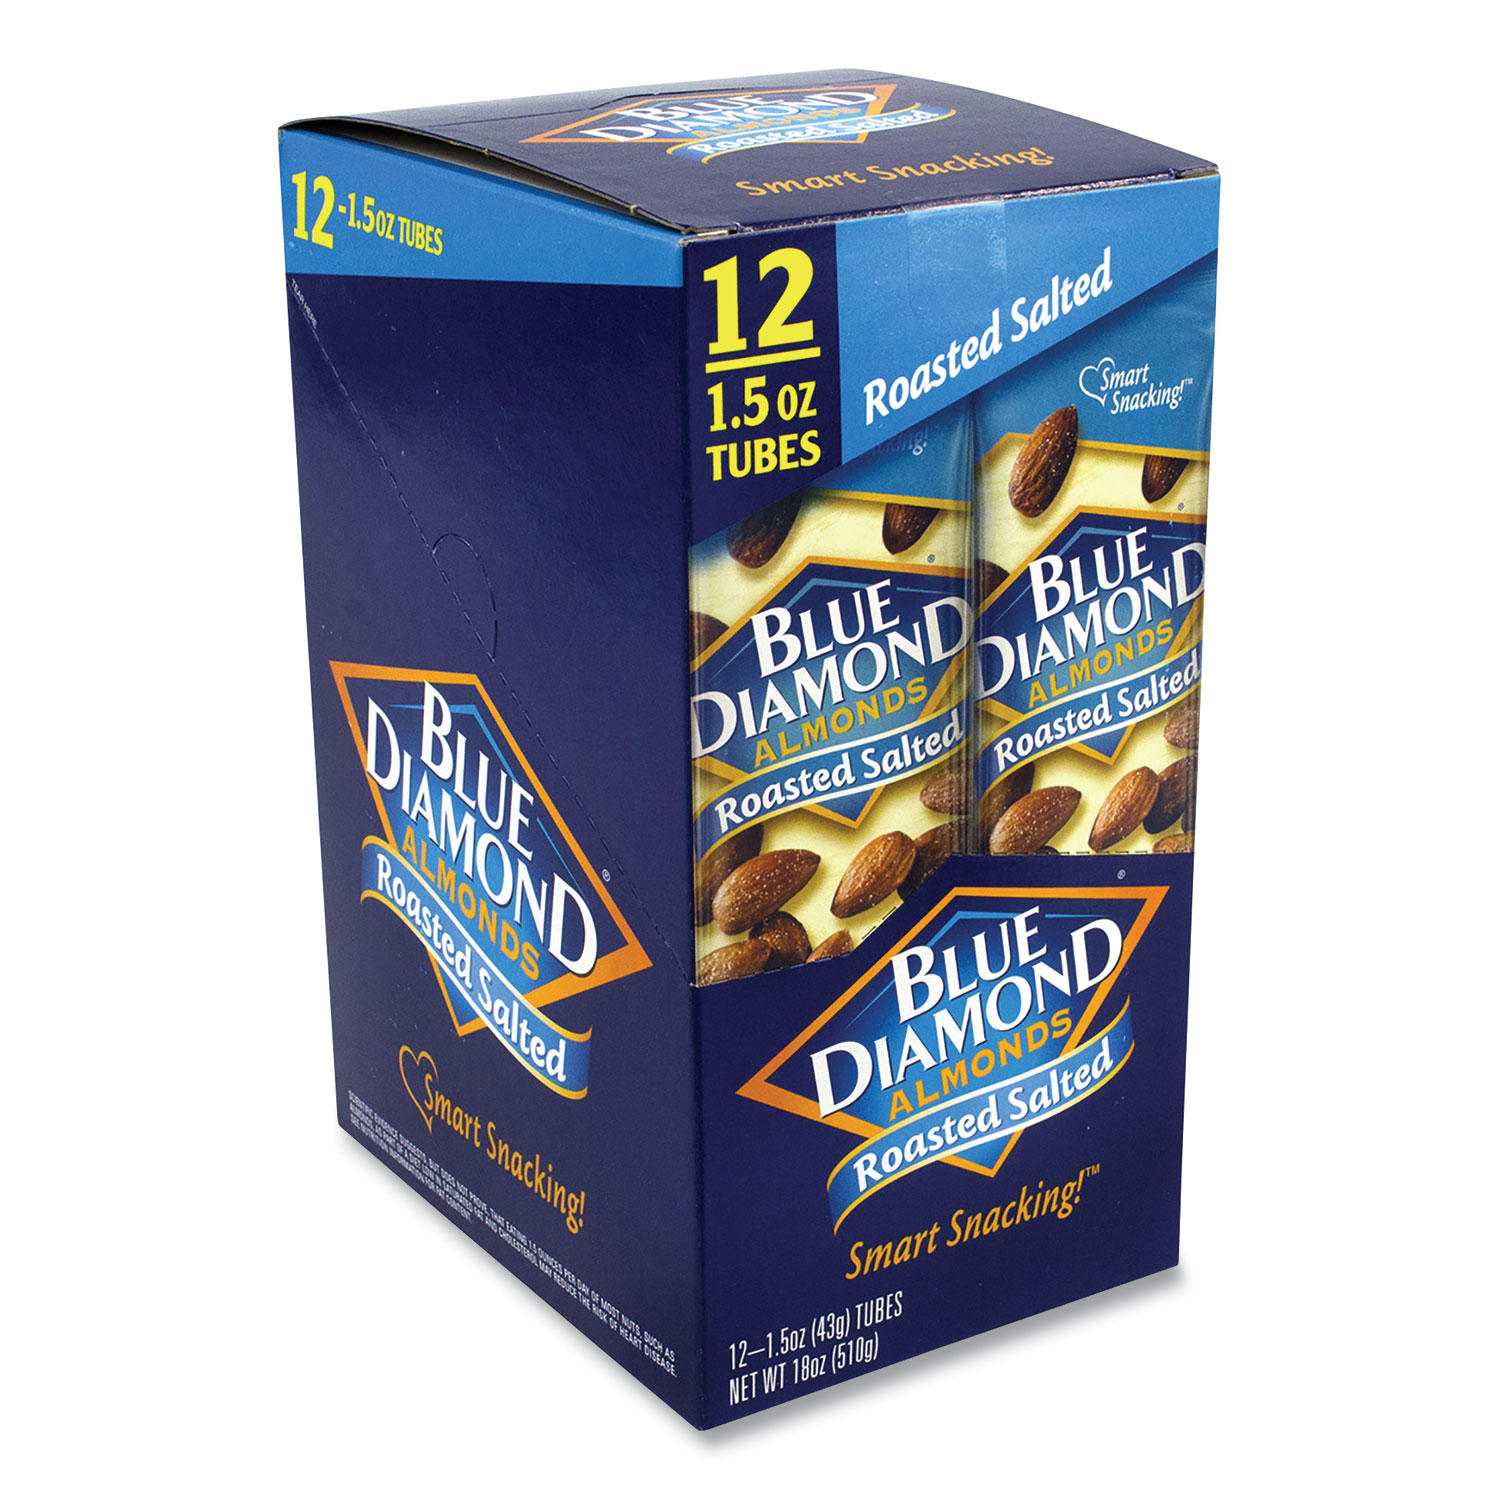 Blue Diamond® Roasted Salted Almonds, 1.5 oz Tube, 12 Tubes/Carton, Free Delivery in 1-4 Business Days